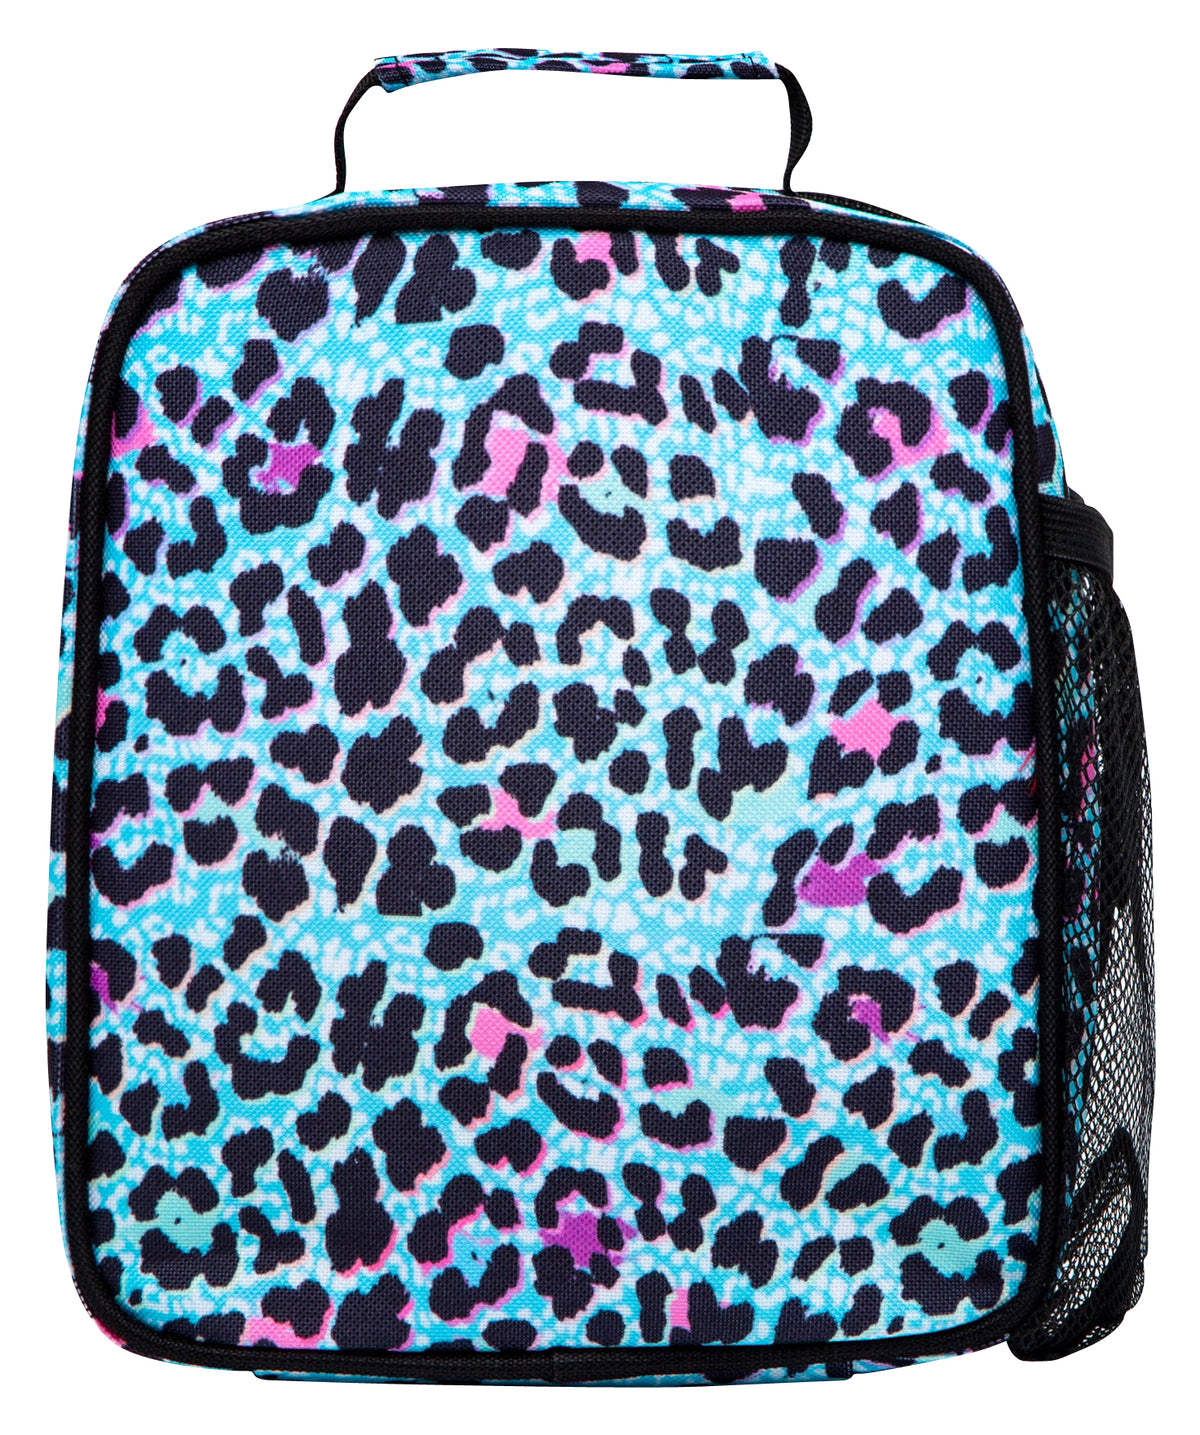 Hype Lunch Bag - Blue Ice Leopard